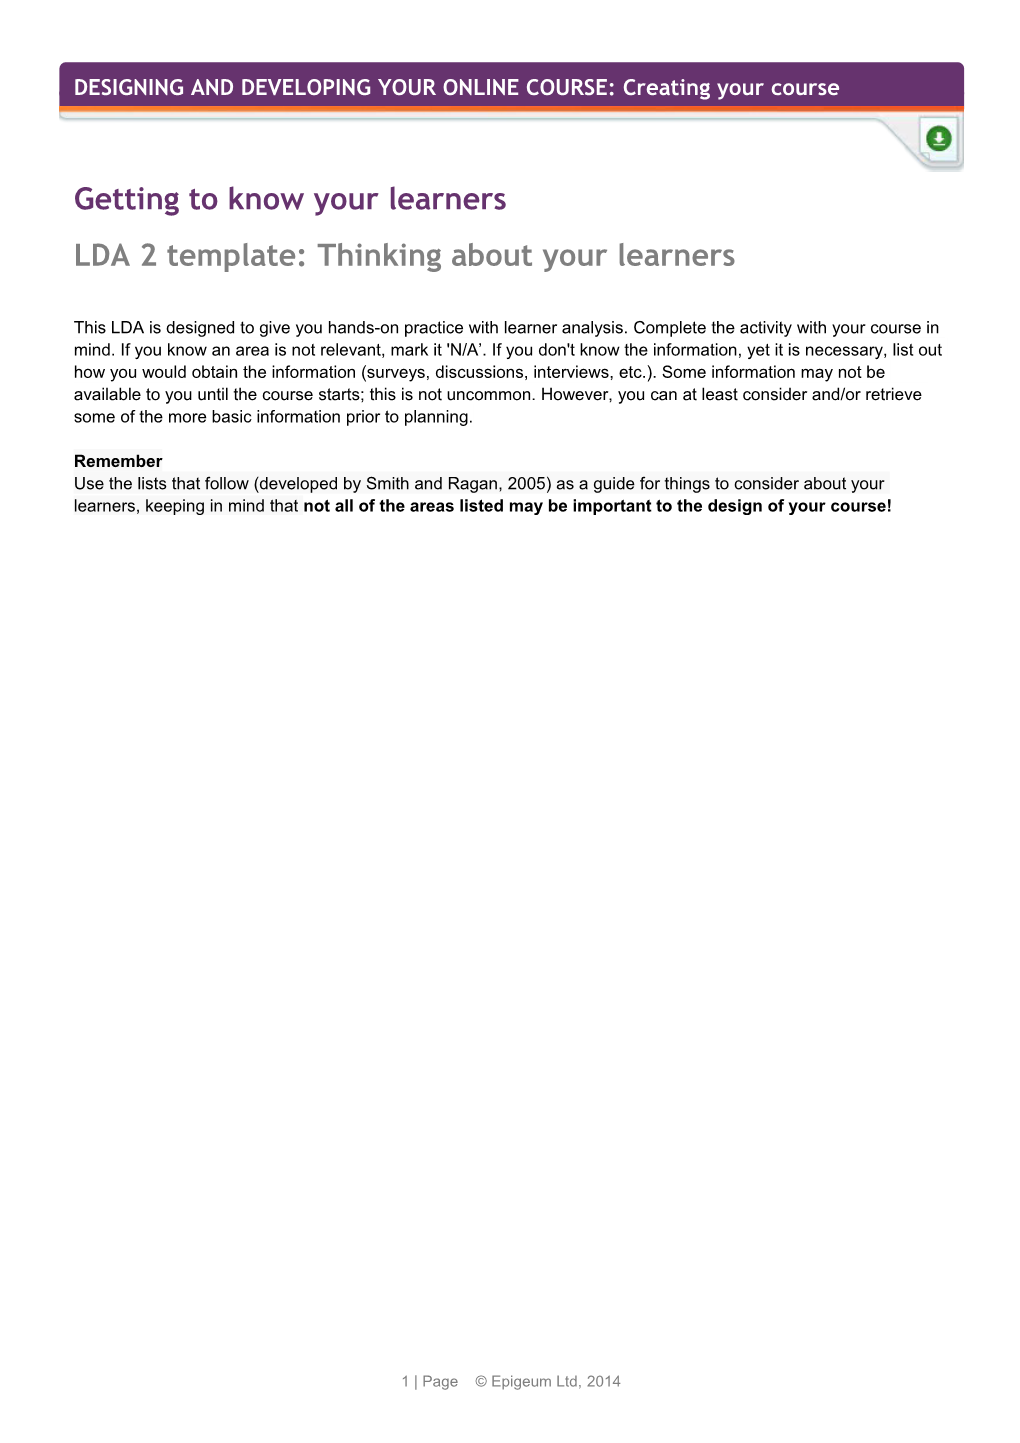 Getting to Know Your Learners